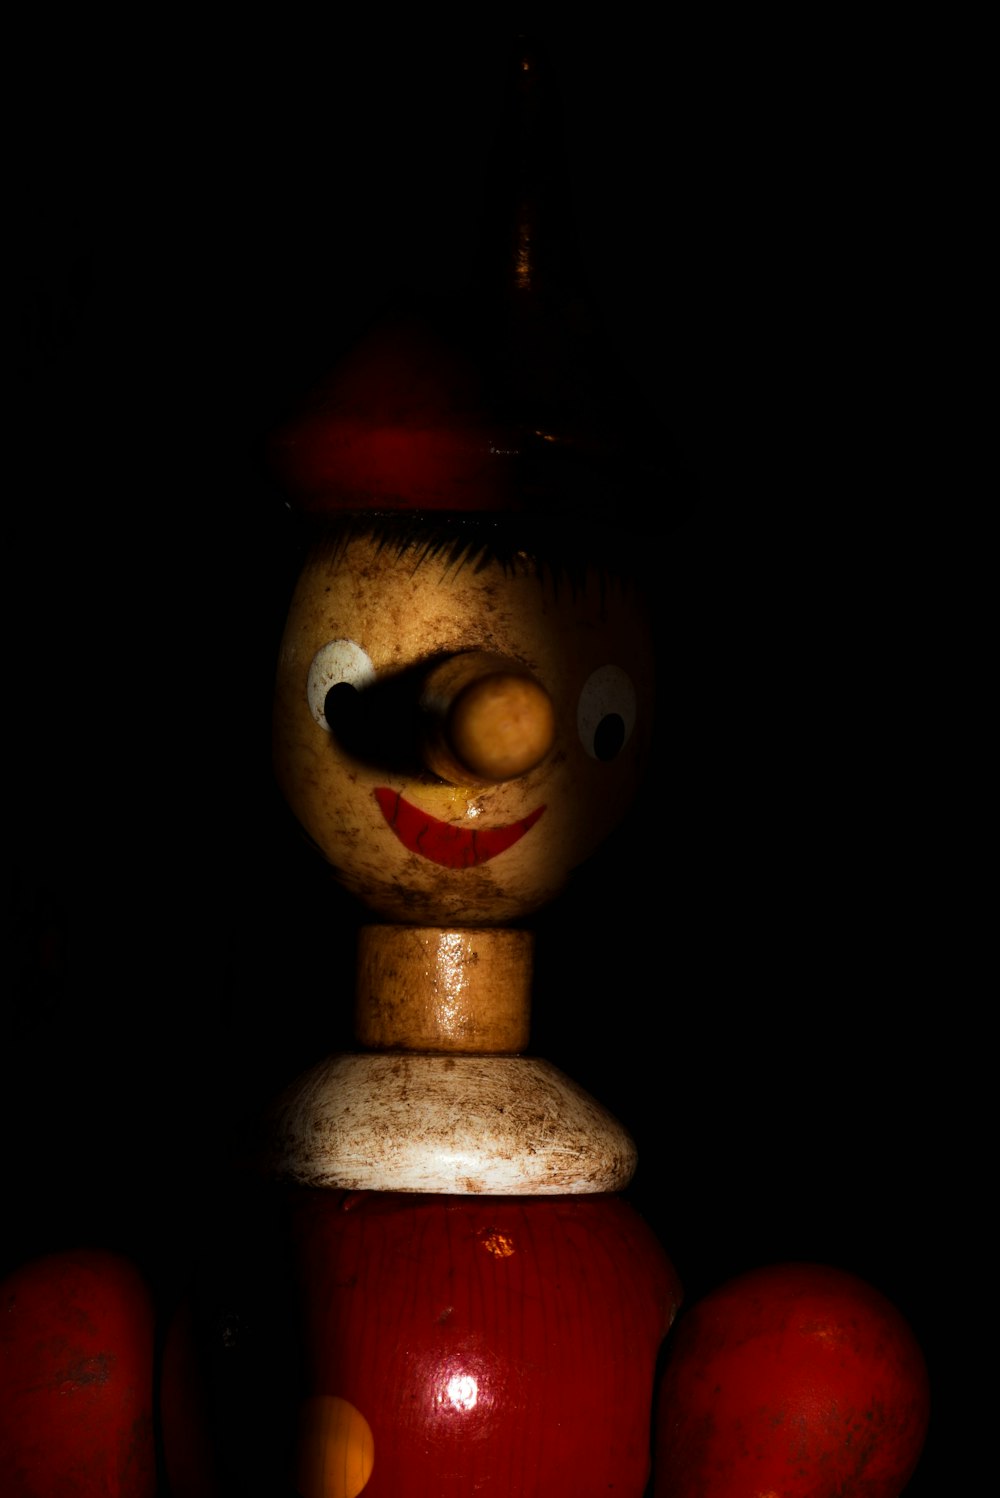 a close up of a wooden toy on a black background